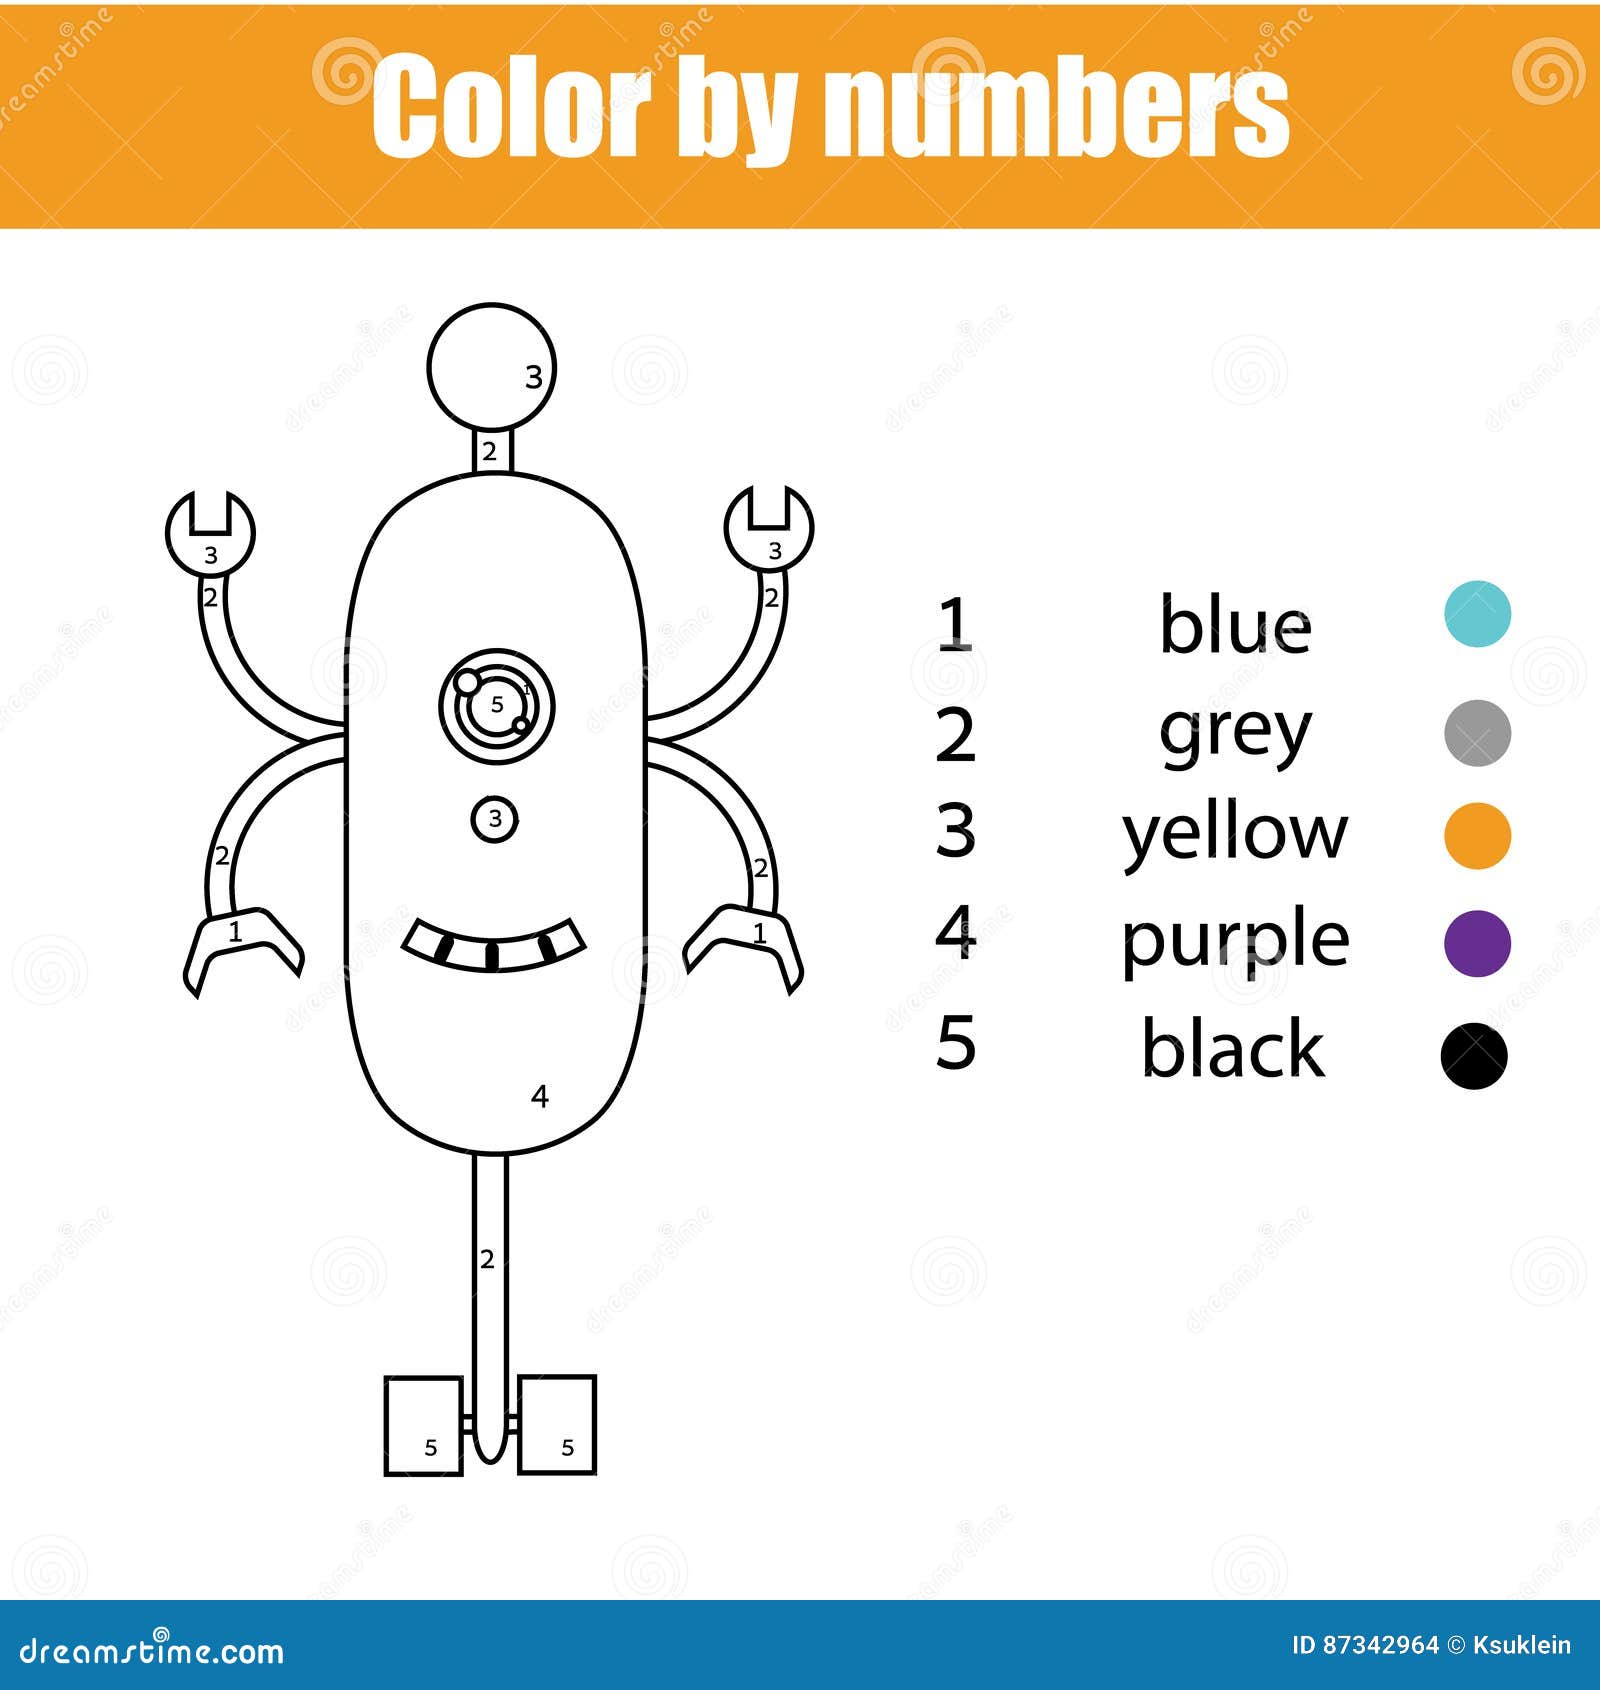 Coloring page with robot character Color by numbers educational children game drawing kids activity